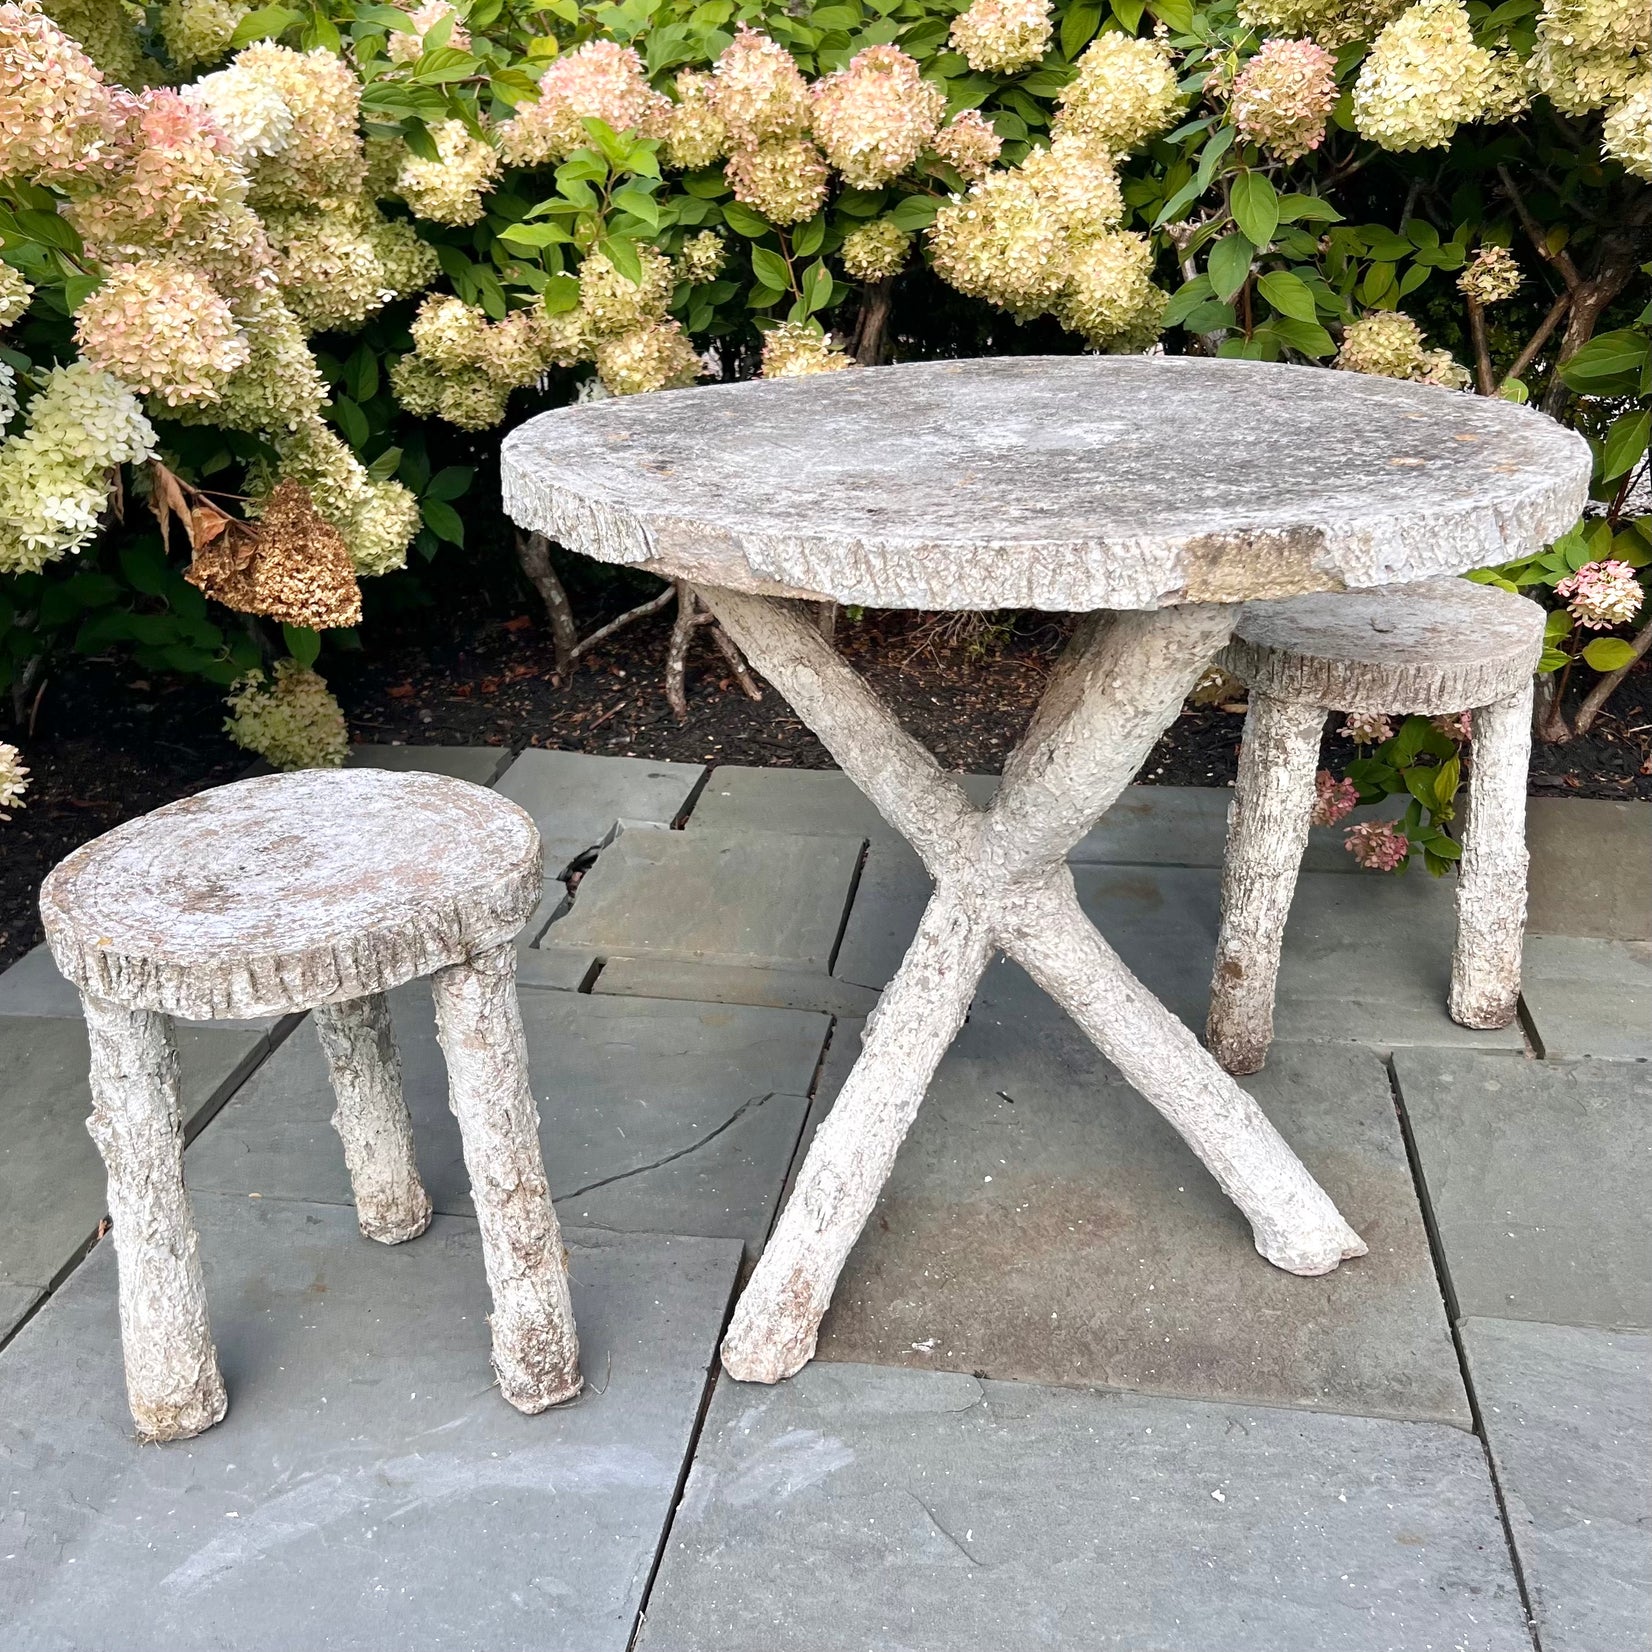 Faux Bois Concrete Table and Two Stools, 1960s France